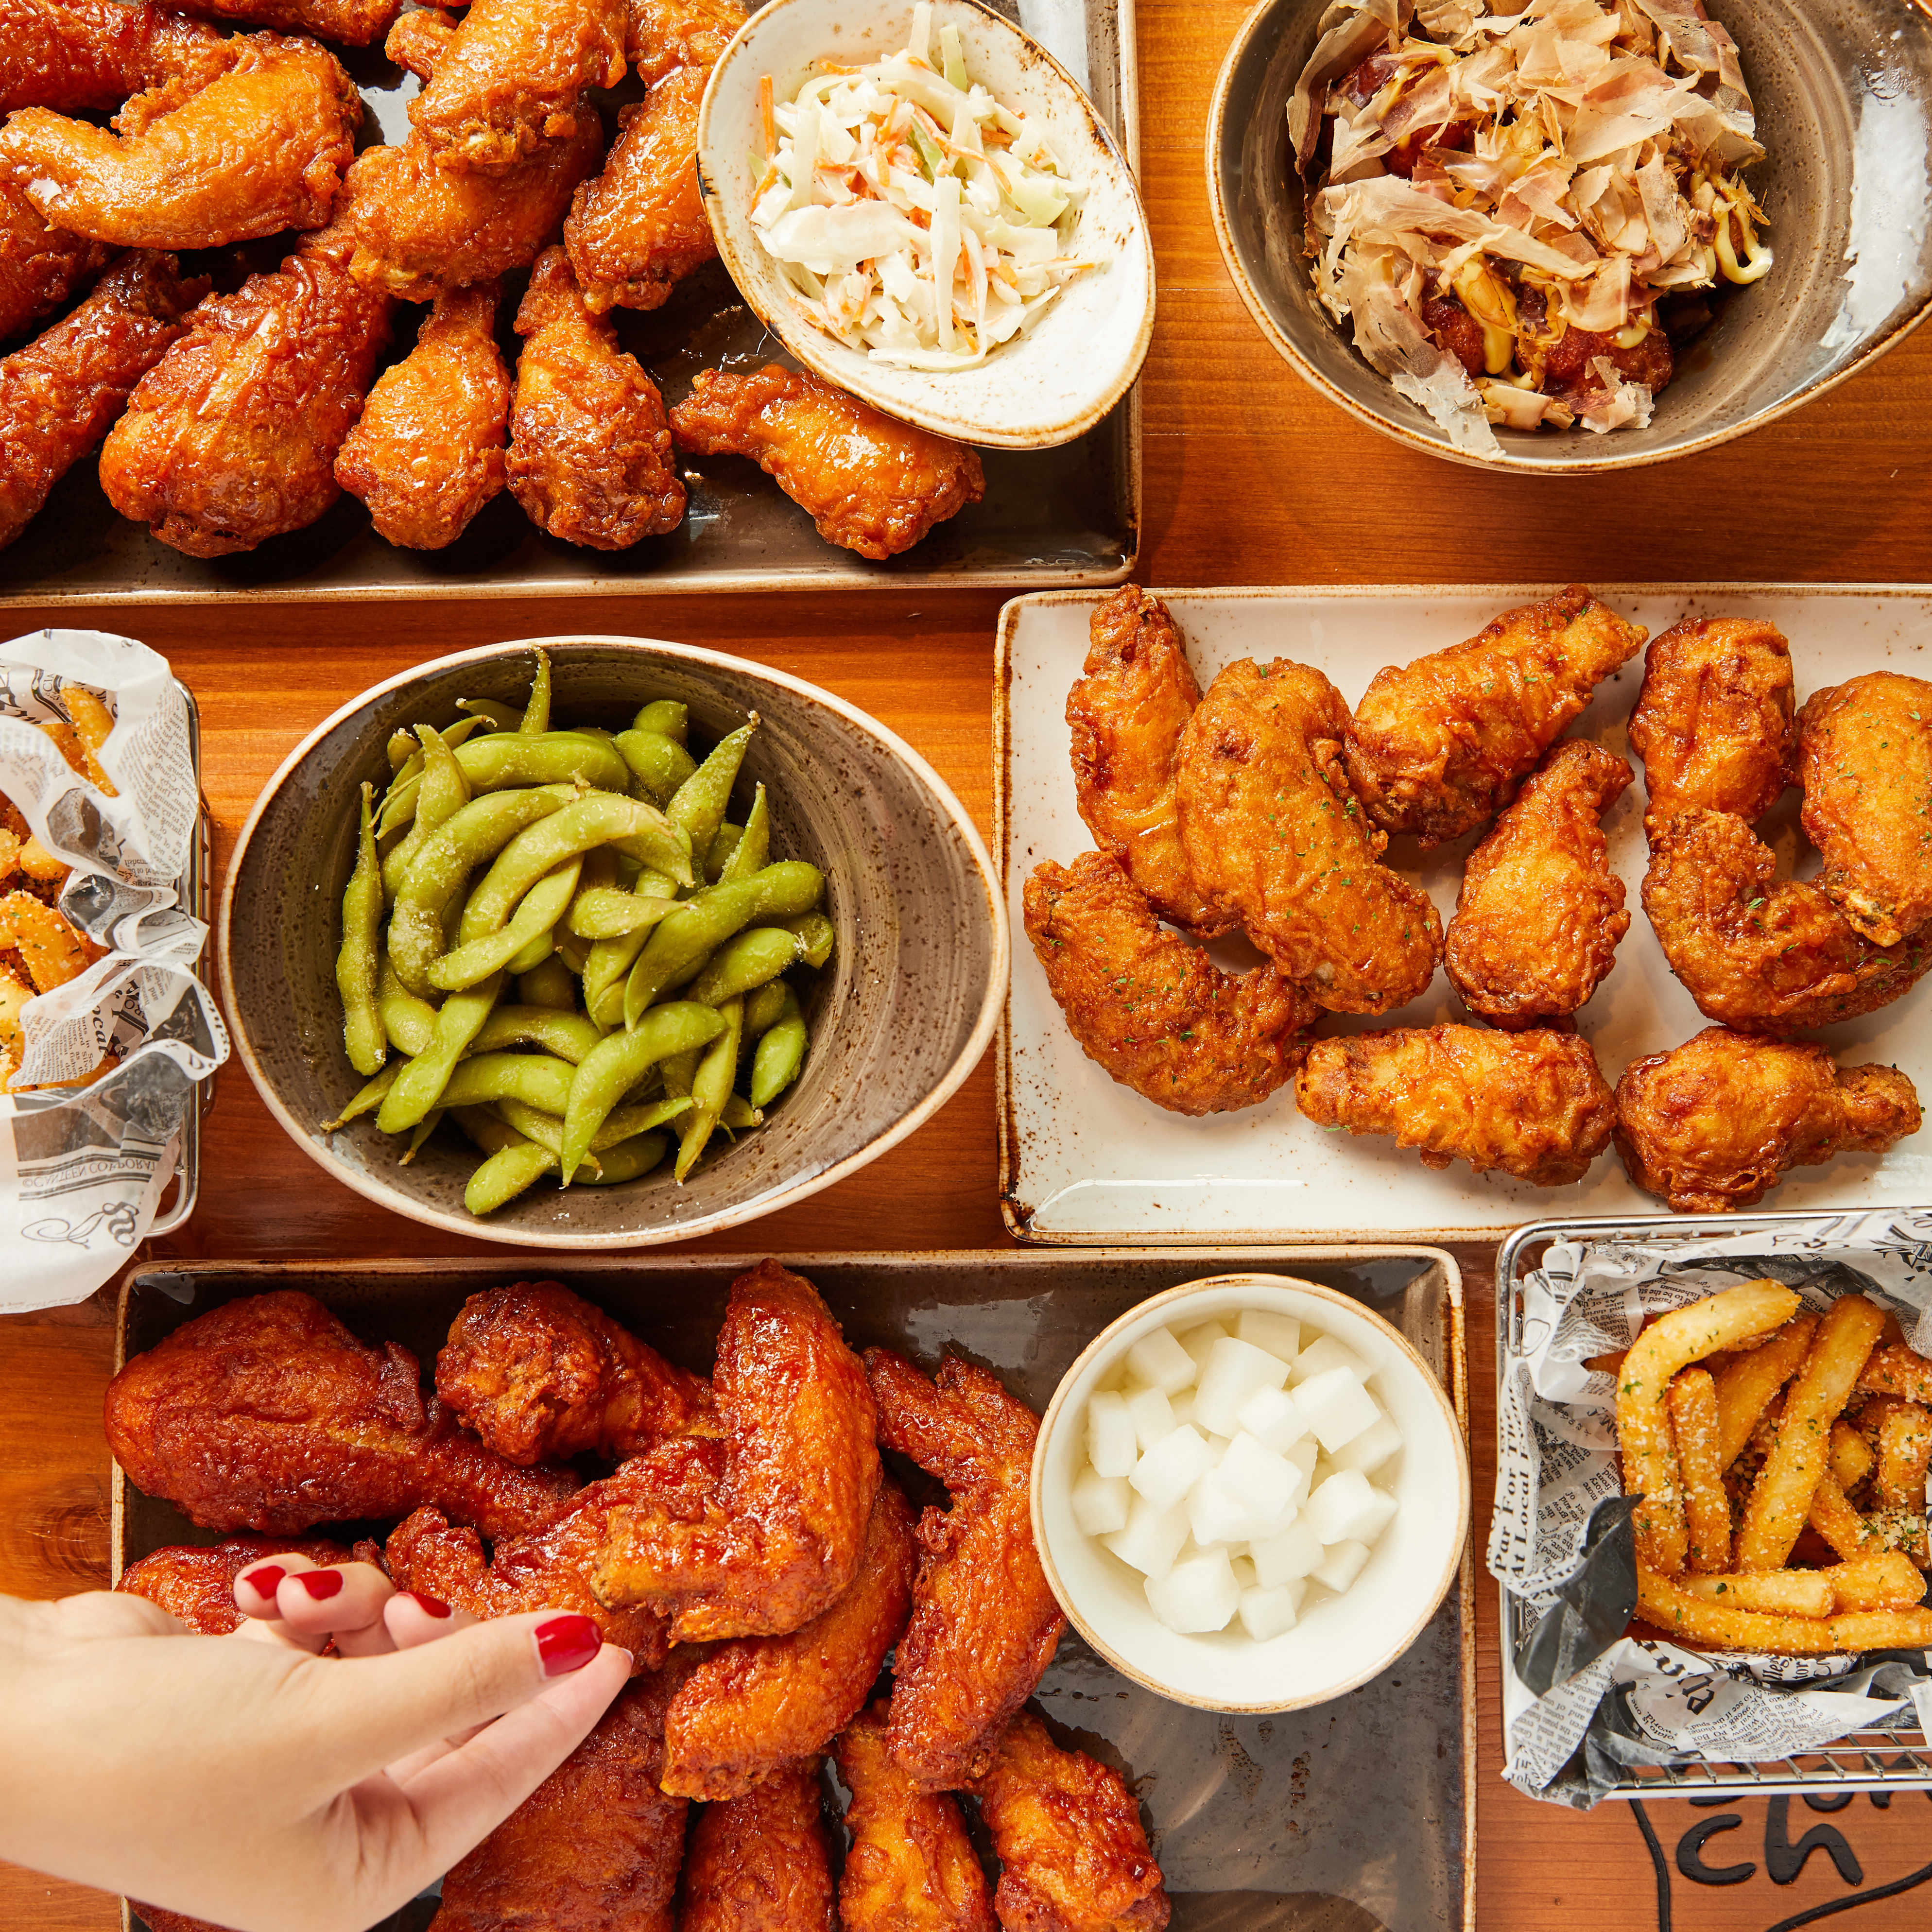 A wooden table is covered in plates of fried chicken, edamame, fries, and radish